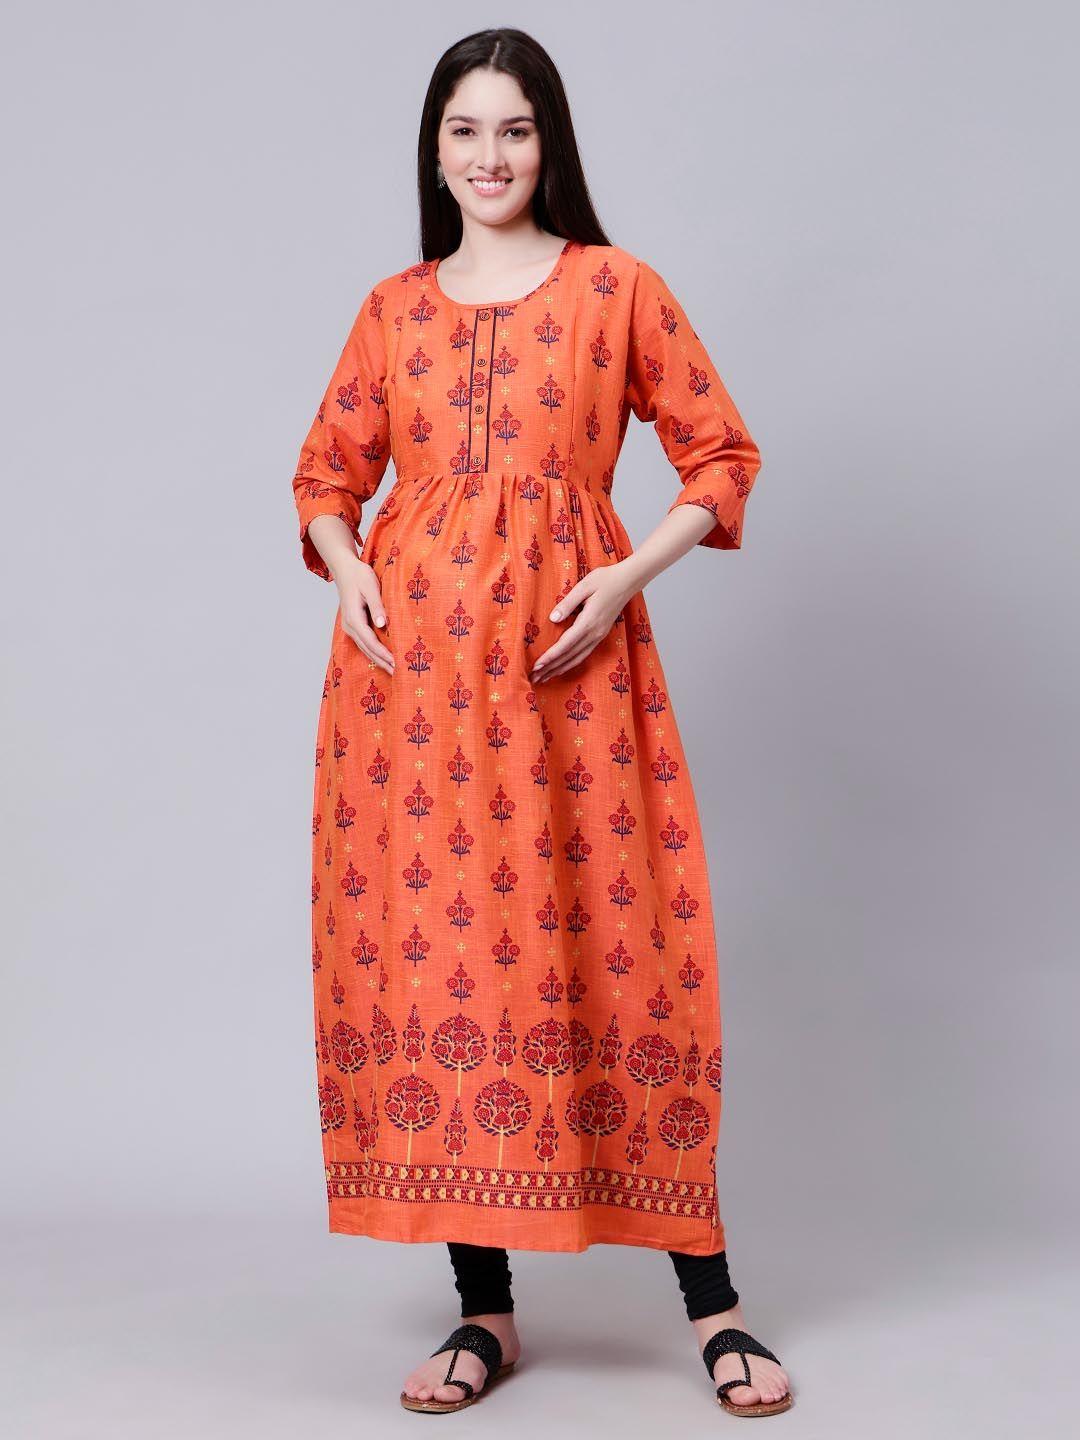 cee-18 maternity floral printed maxi ethnic dress